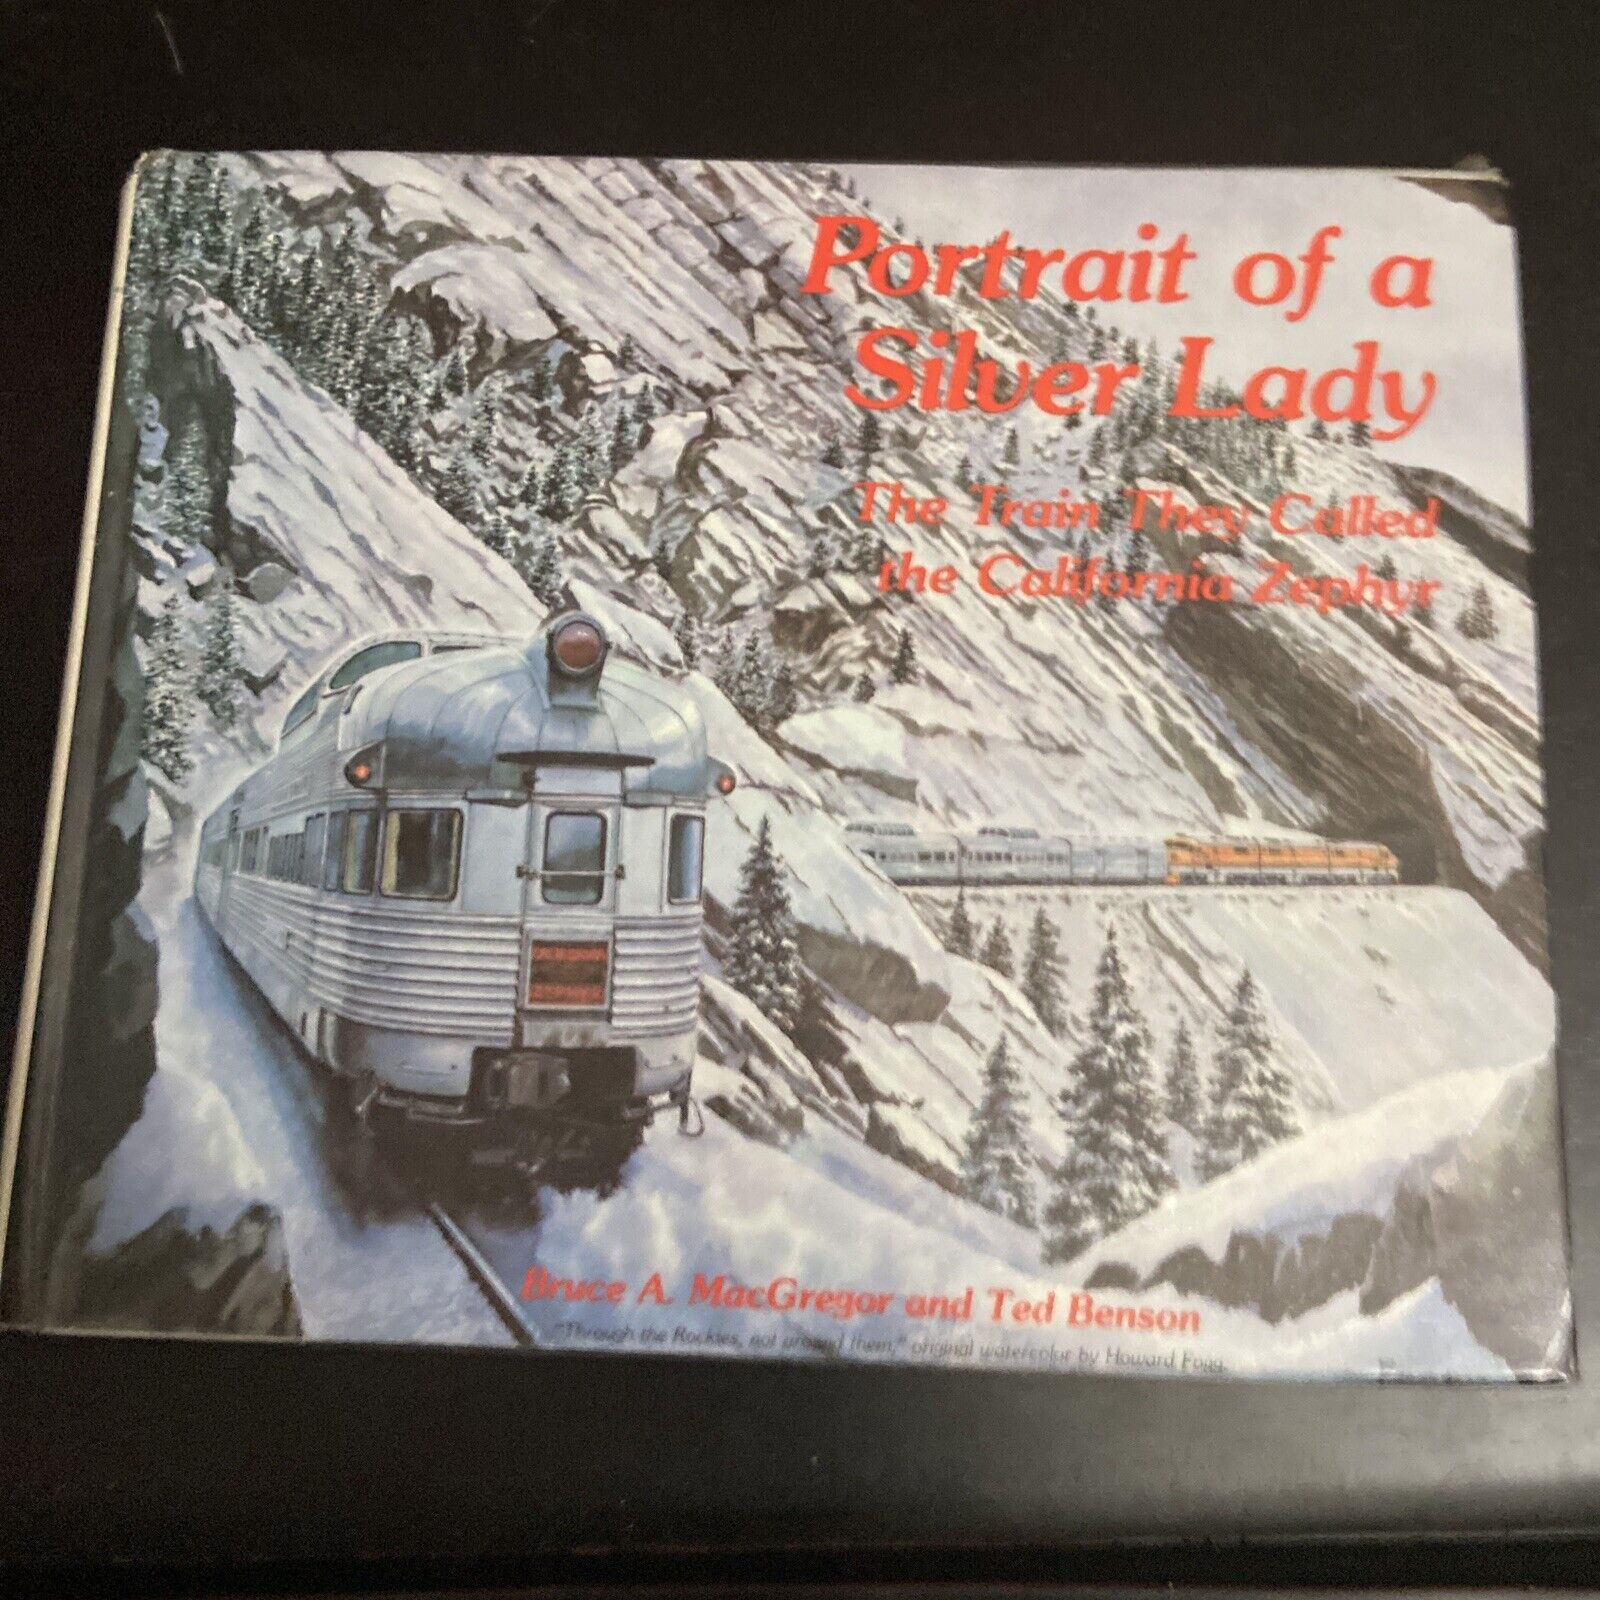 PORTRAIT OF A SILVER LADY: THE TRAIN THEY CALLED THE By Bruce A. Macgregor & Ted